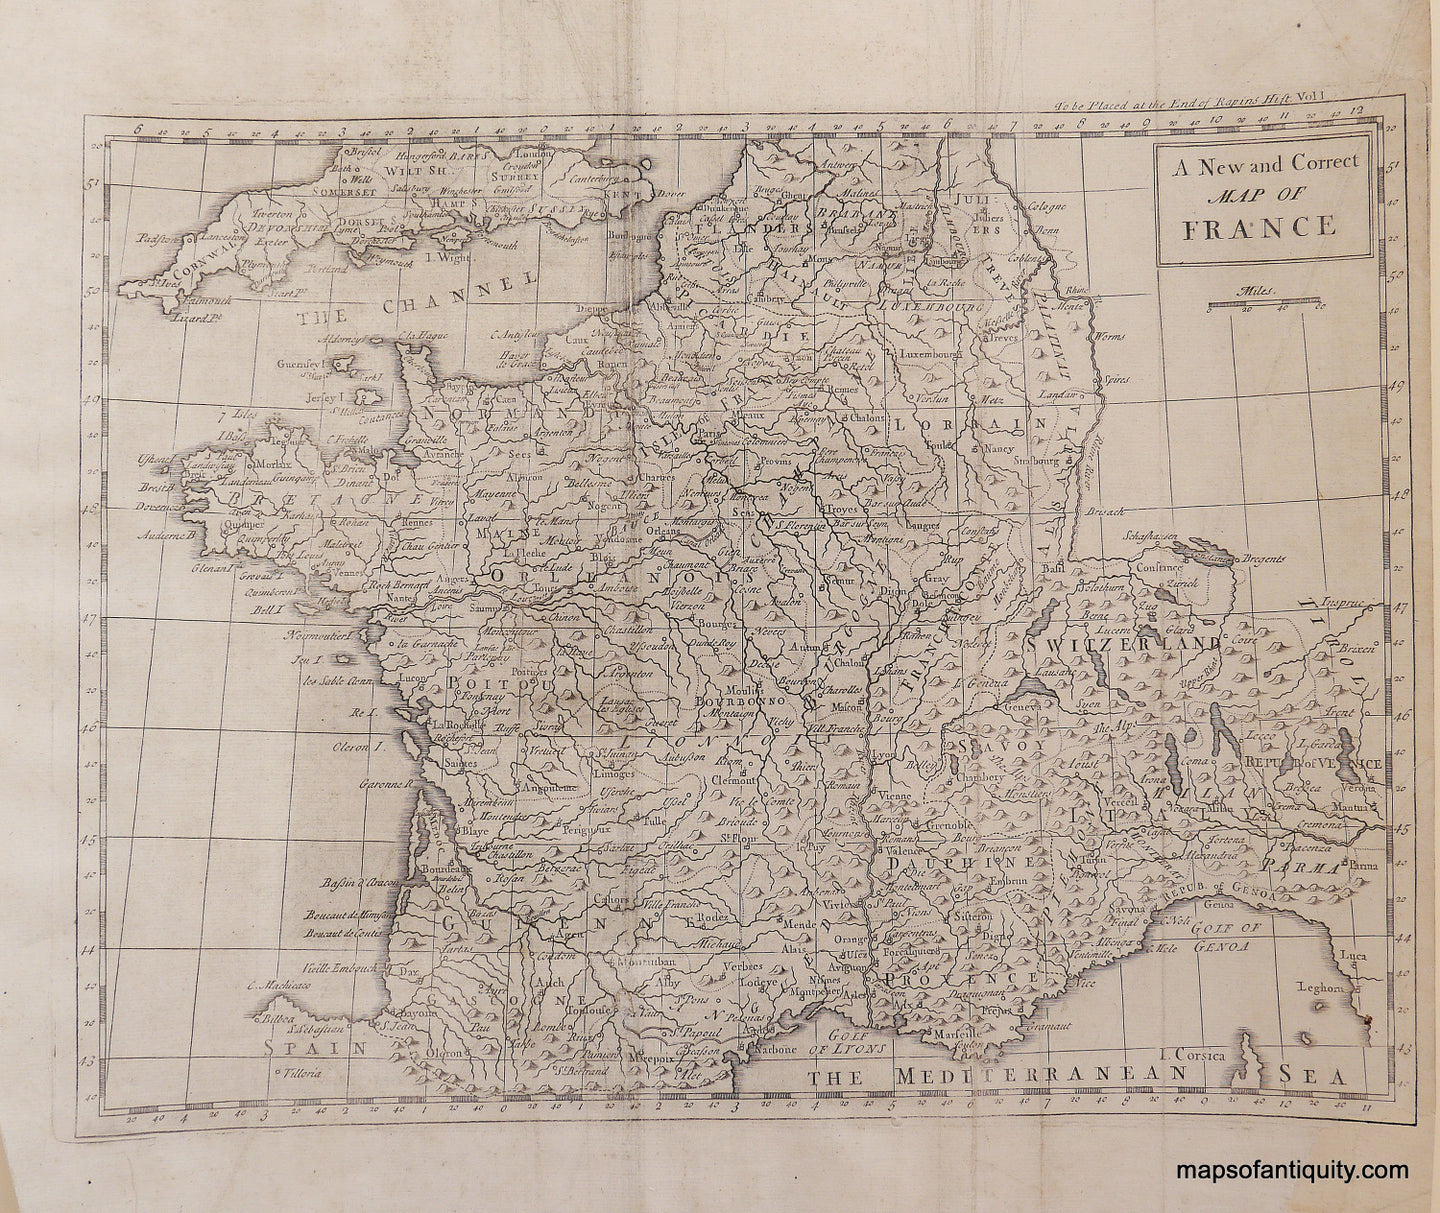 Black-and-White-Antique-Map-A-New-and-Correct-Map-of-France-Europe-France-1745-Rapin-Maps-Of-Antiquity